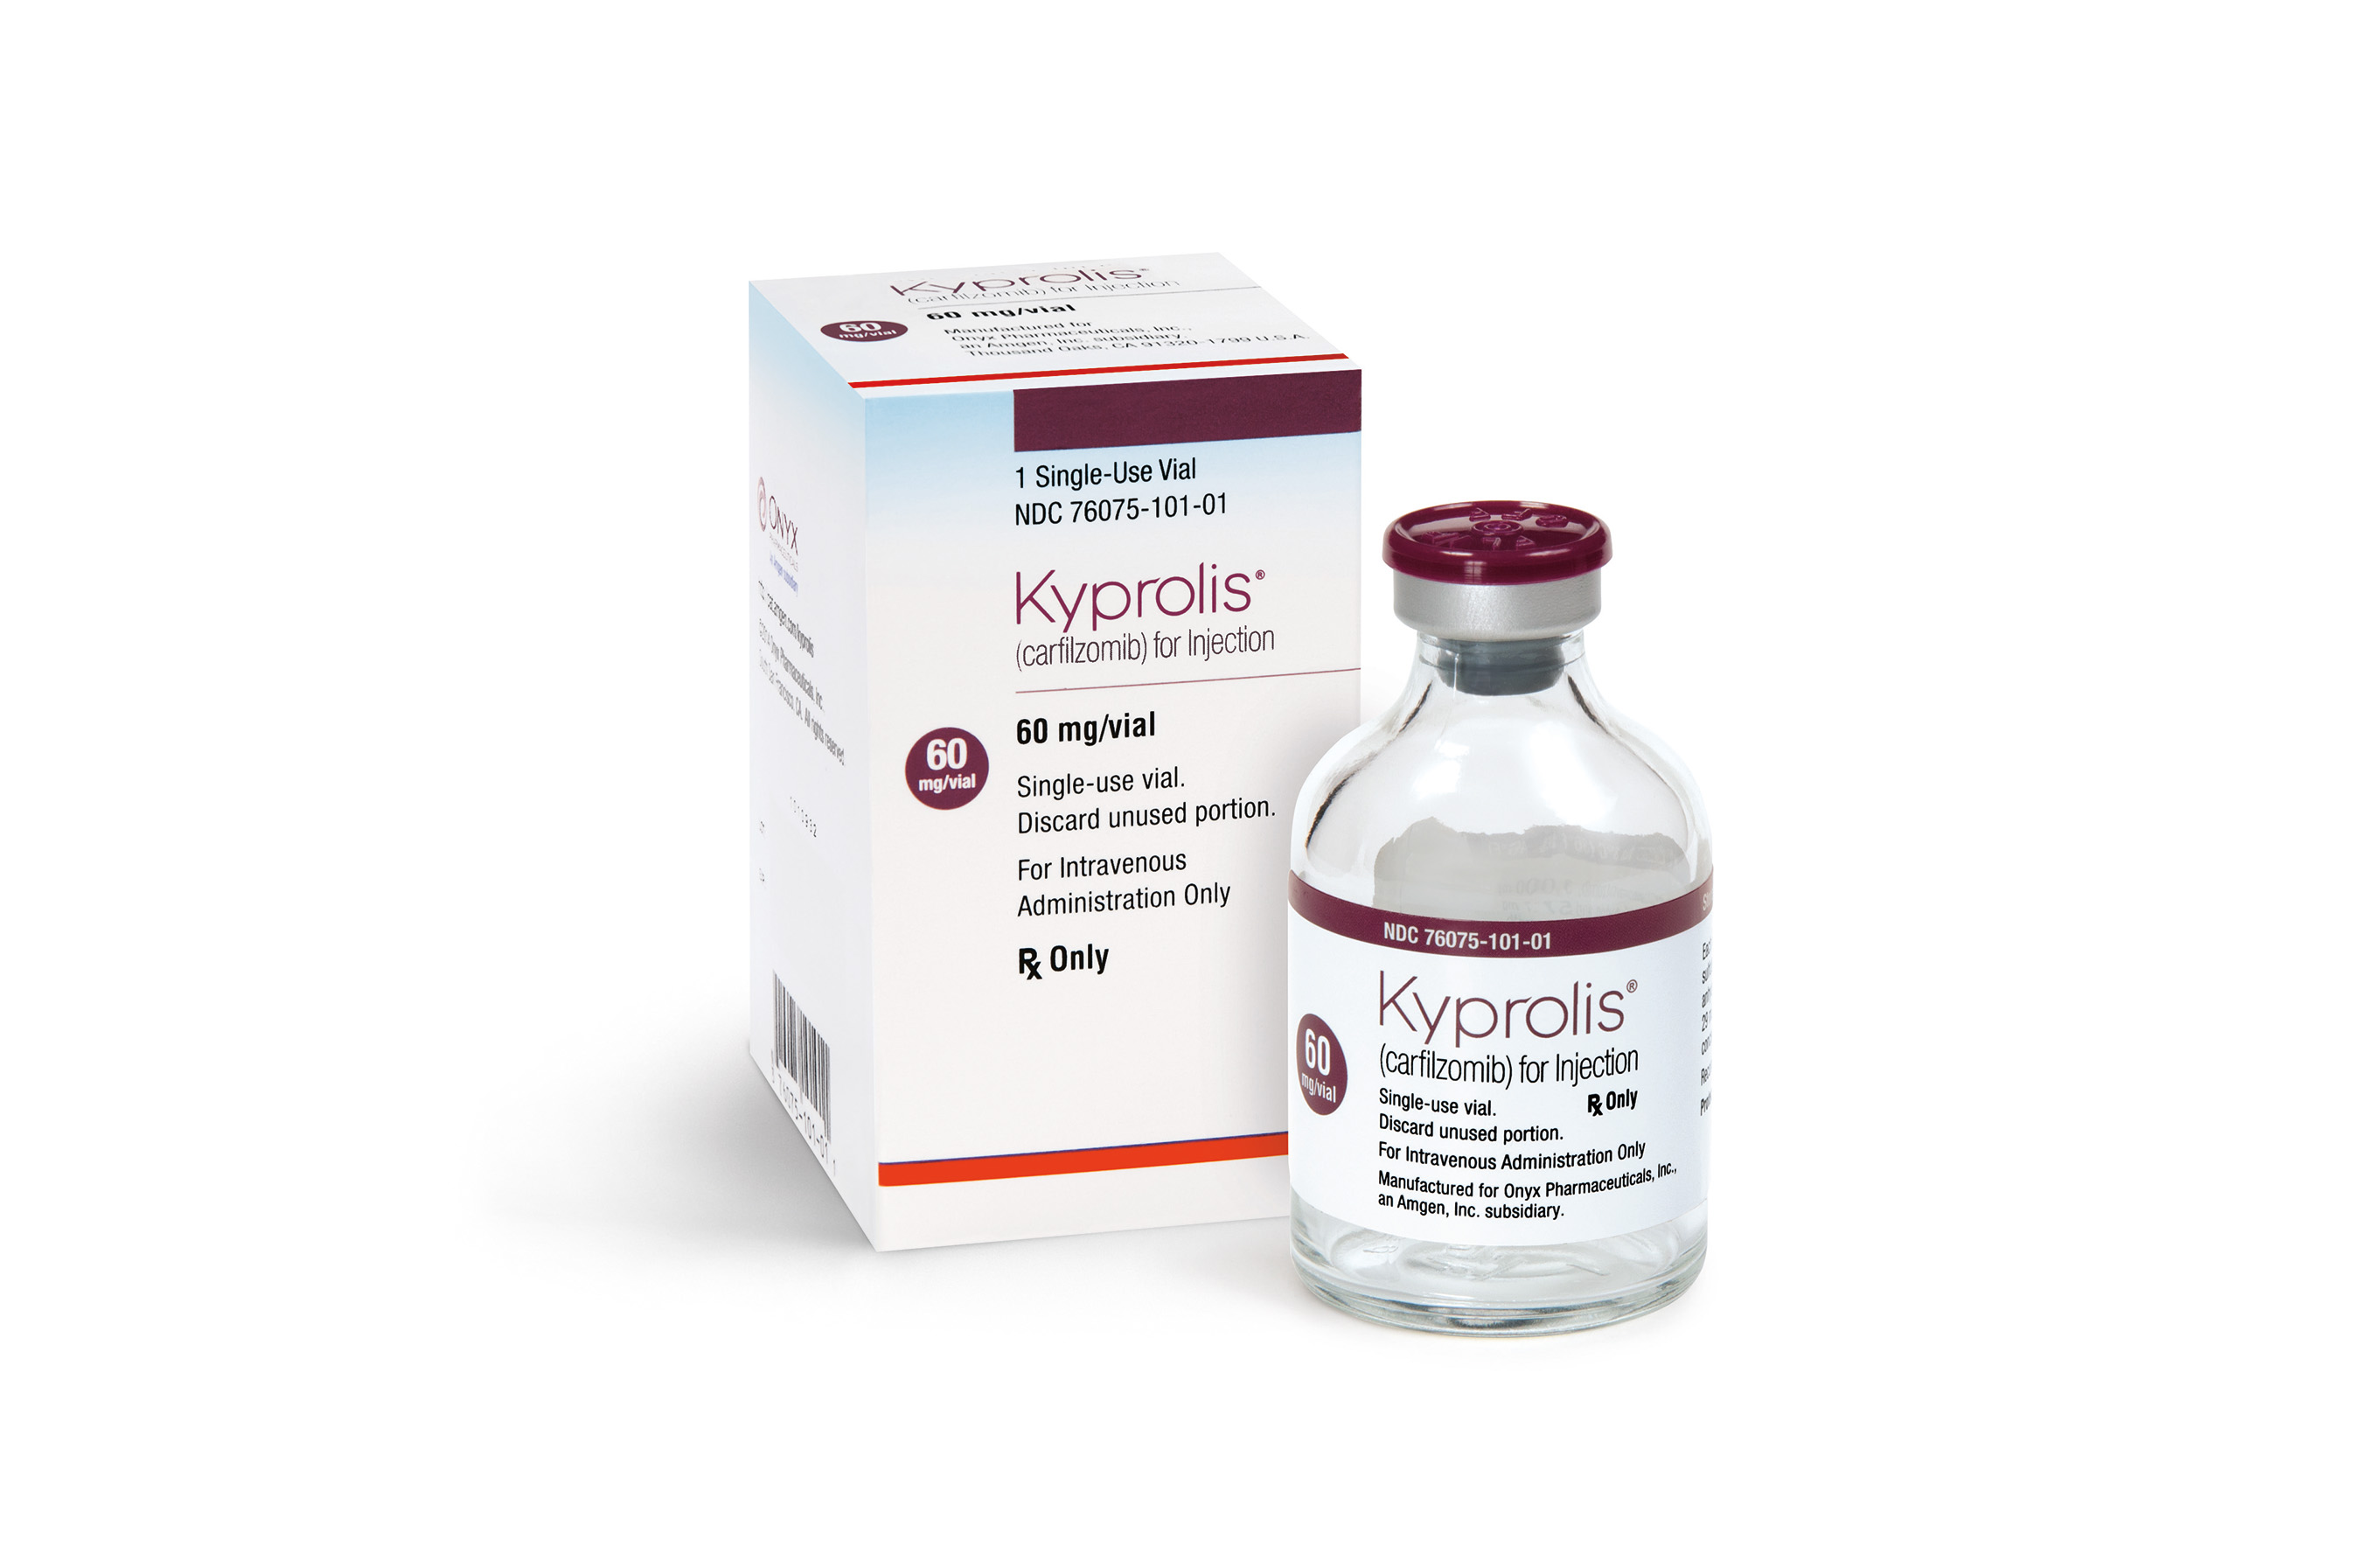 FDA APPROVES KYPROLIS® (CARFILZOMIB) FOR COMBINATION USE IN THE .